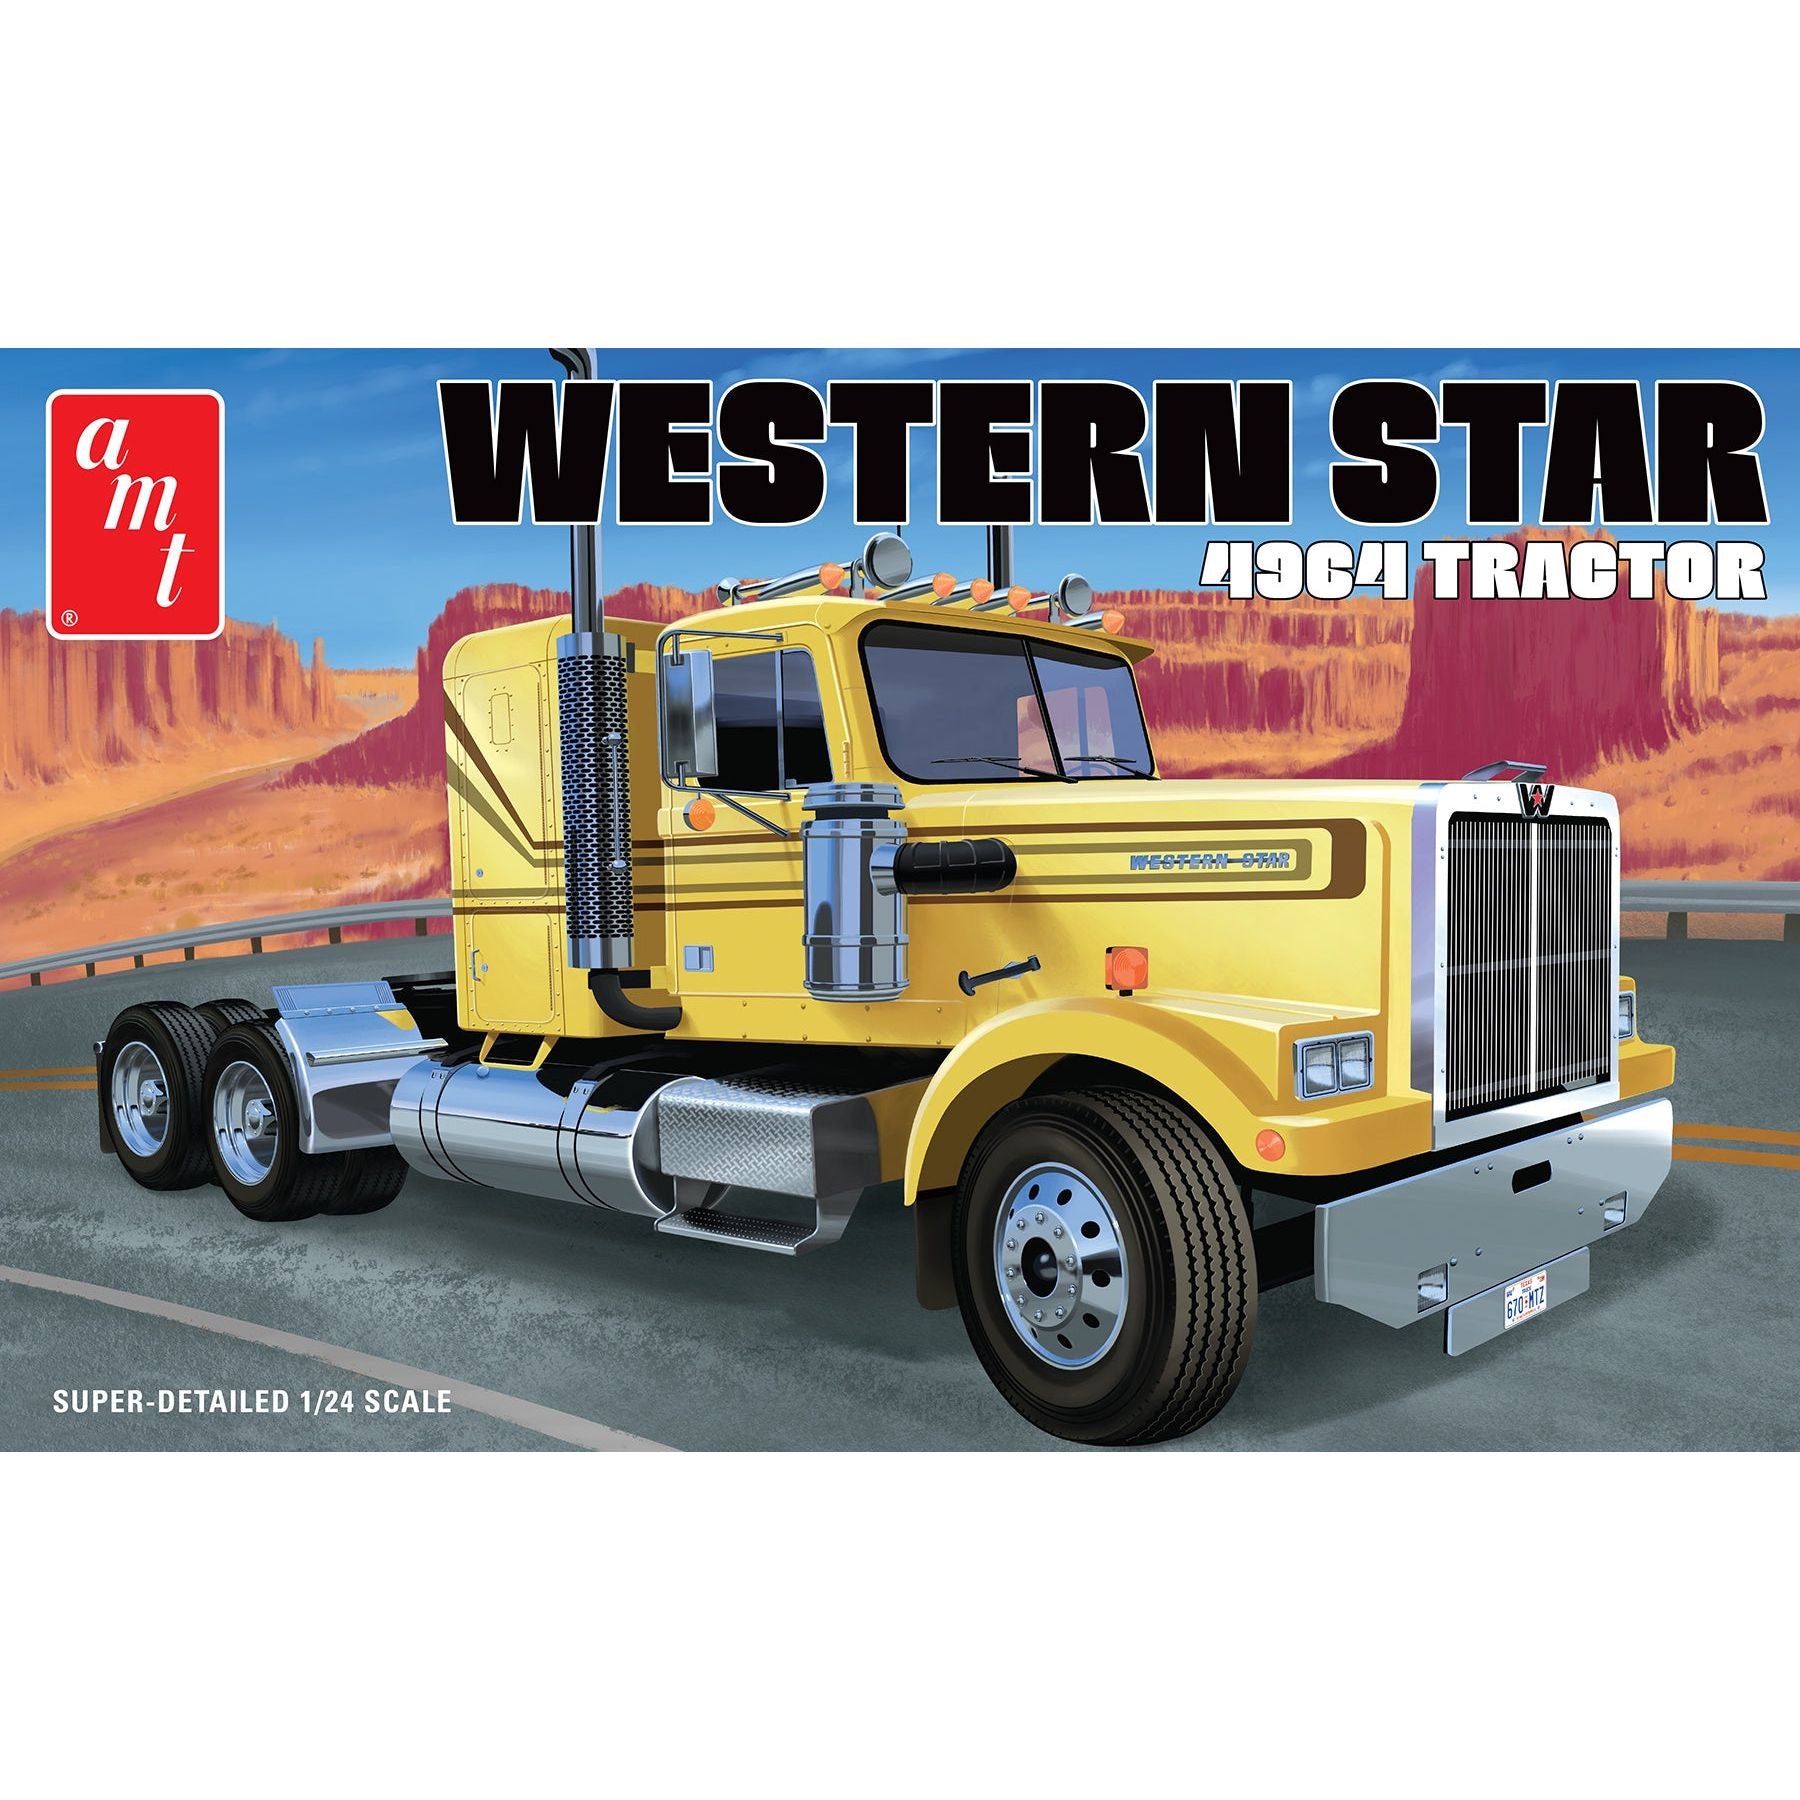 Western Star 4946 Tractor 1/24 #1300 by AMT